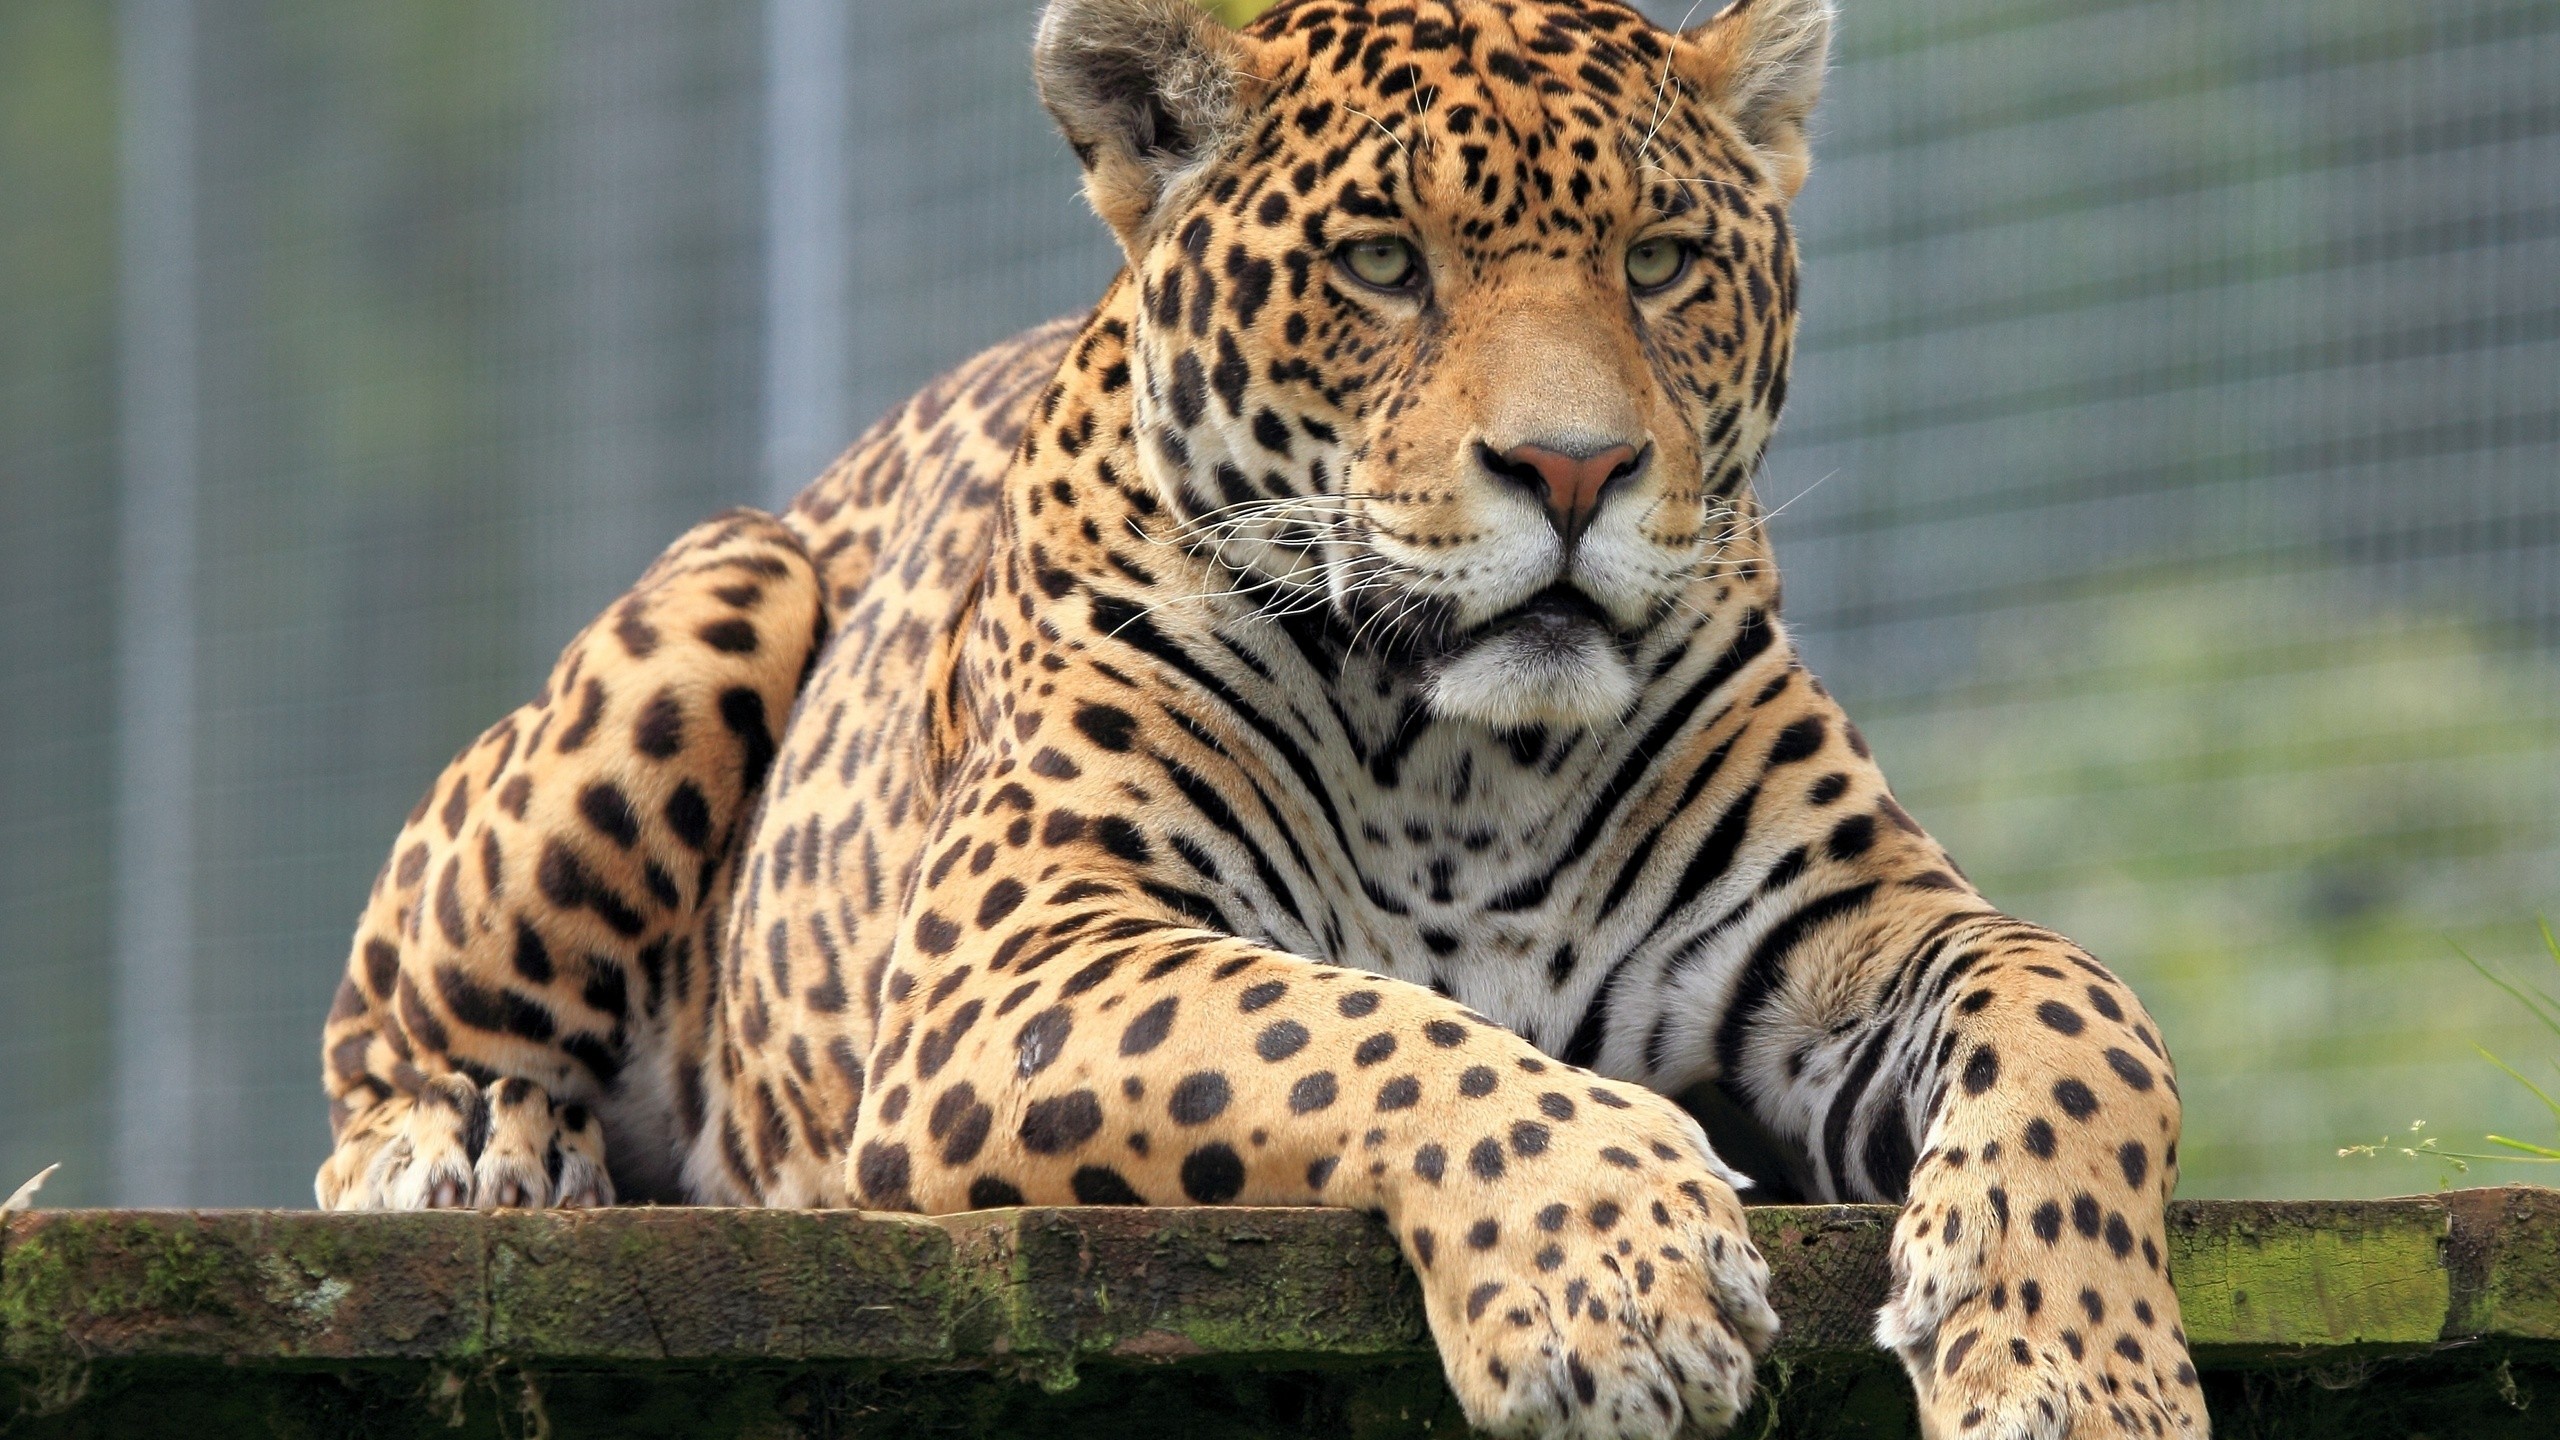 Wallpapers muzzle zoo big cats on the desktop